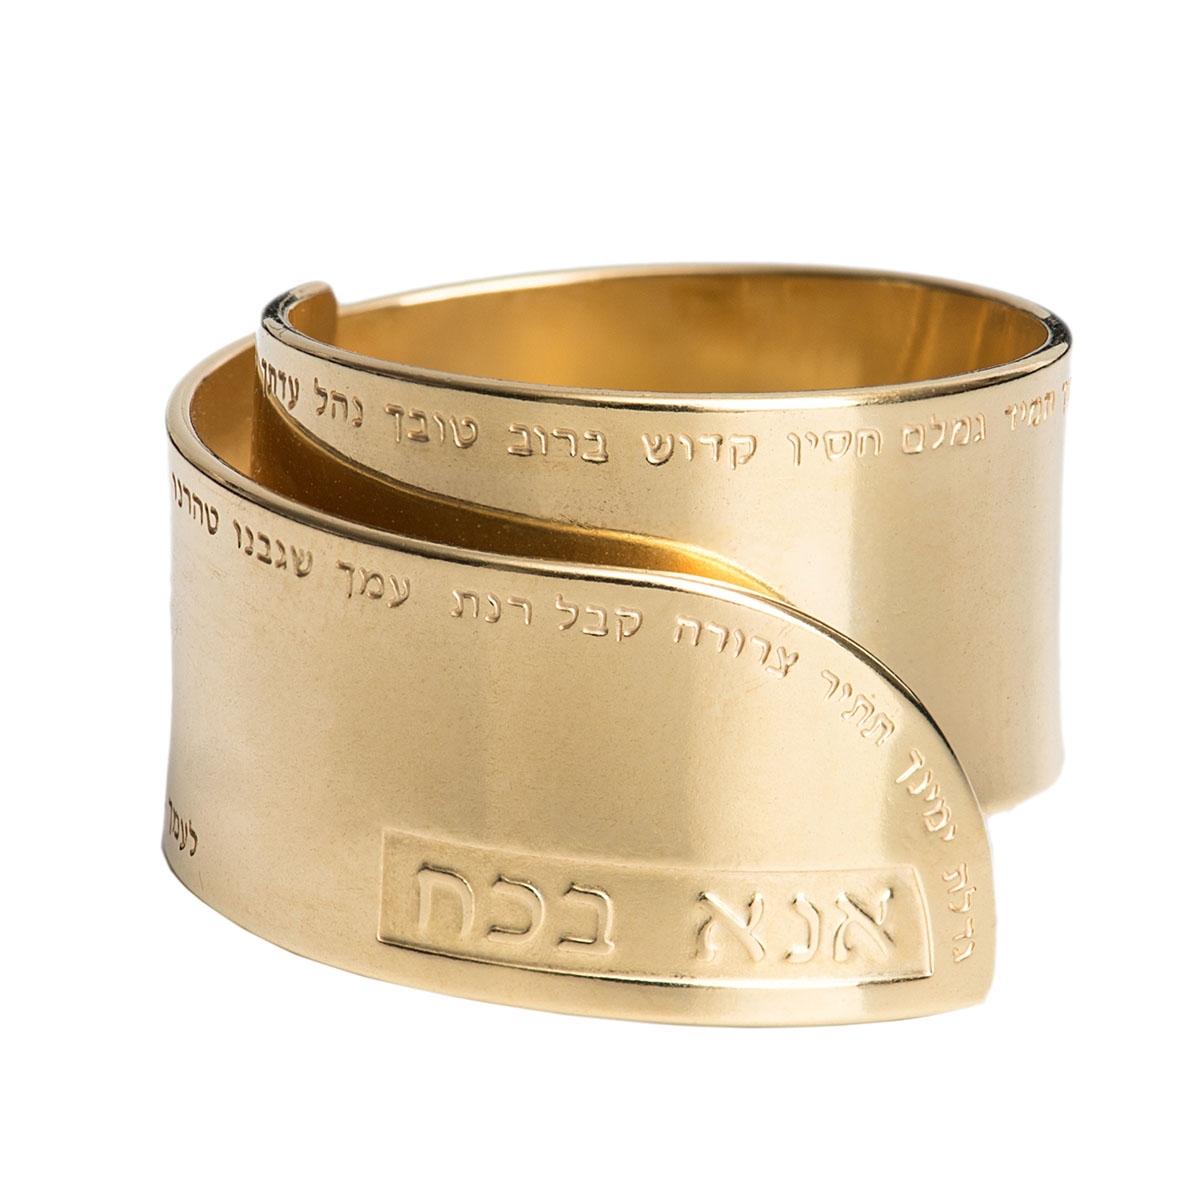 Stunning Handcrafted 18K Gold-Plated Adjustable Ring With Ana BeKoach Prayer - 1